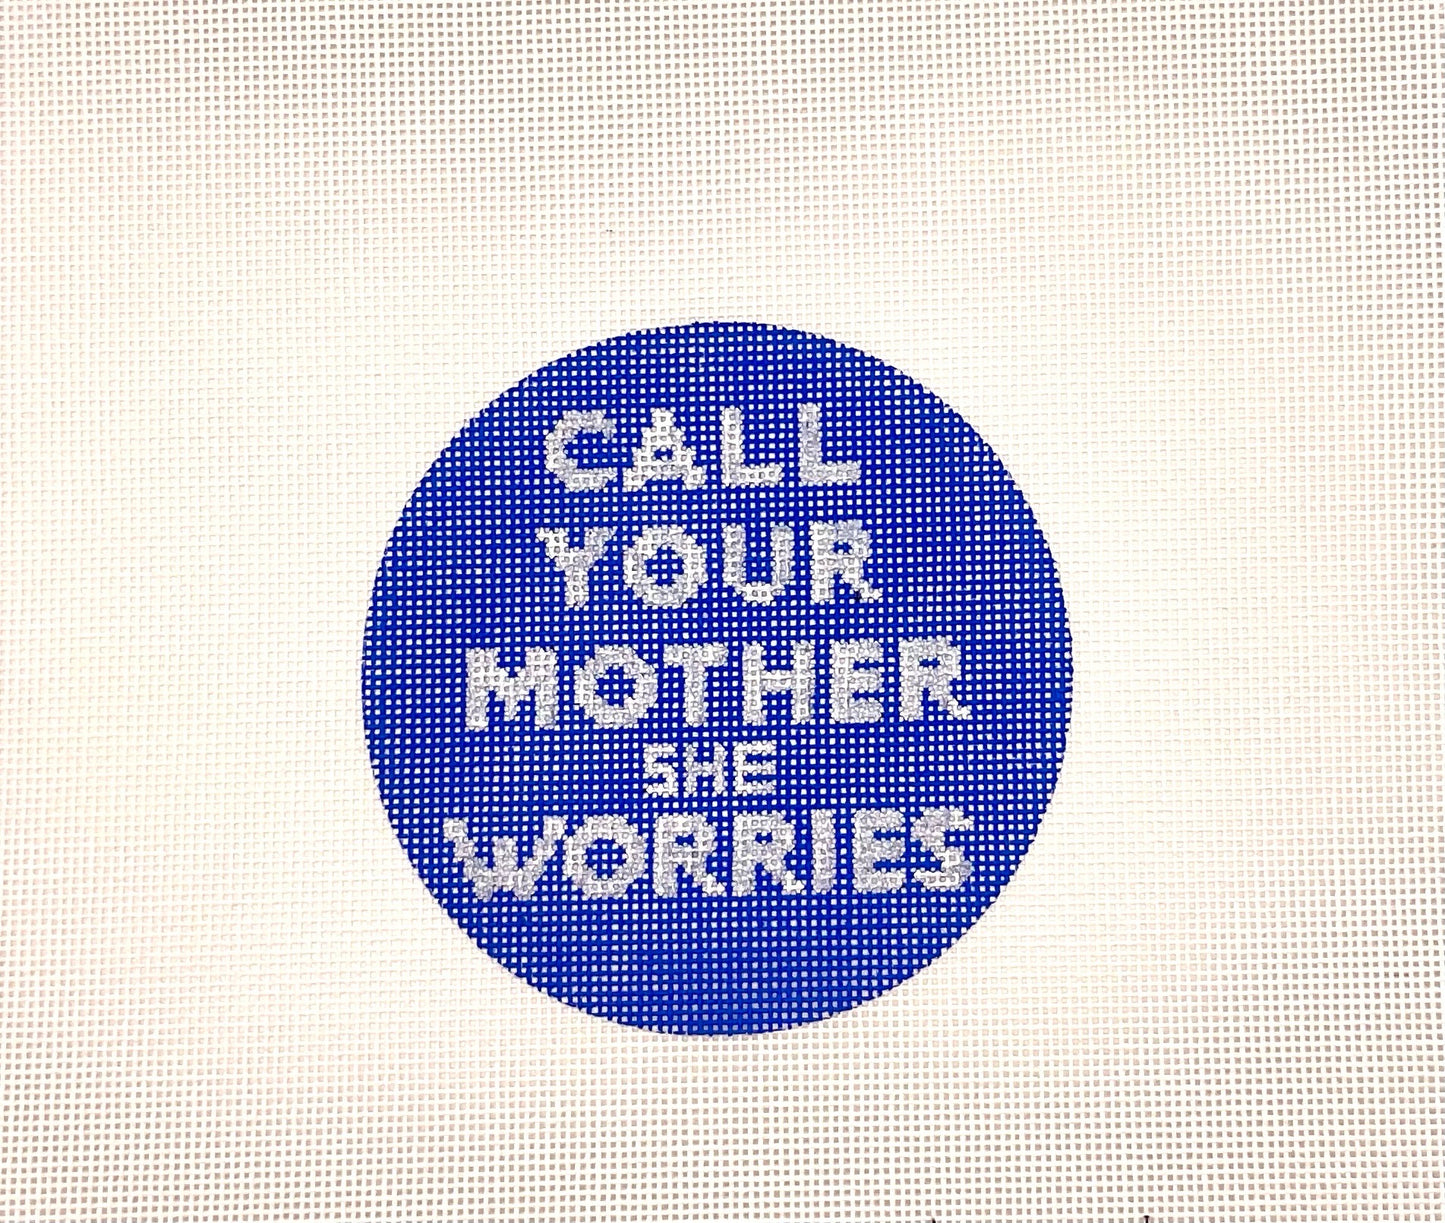 Call Your Mother, She Worries